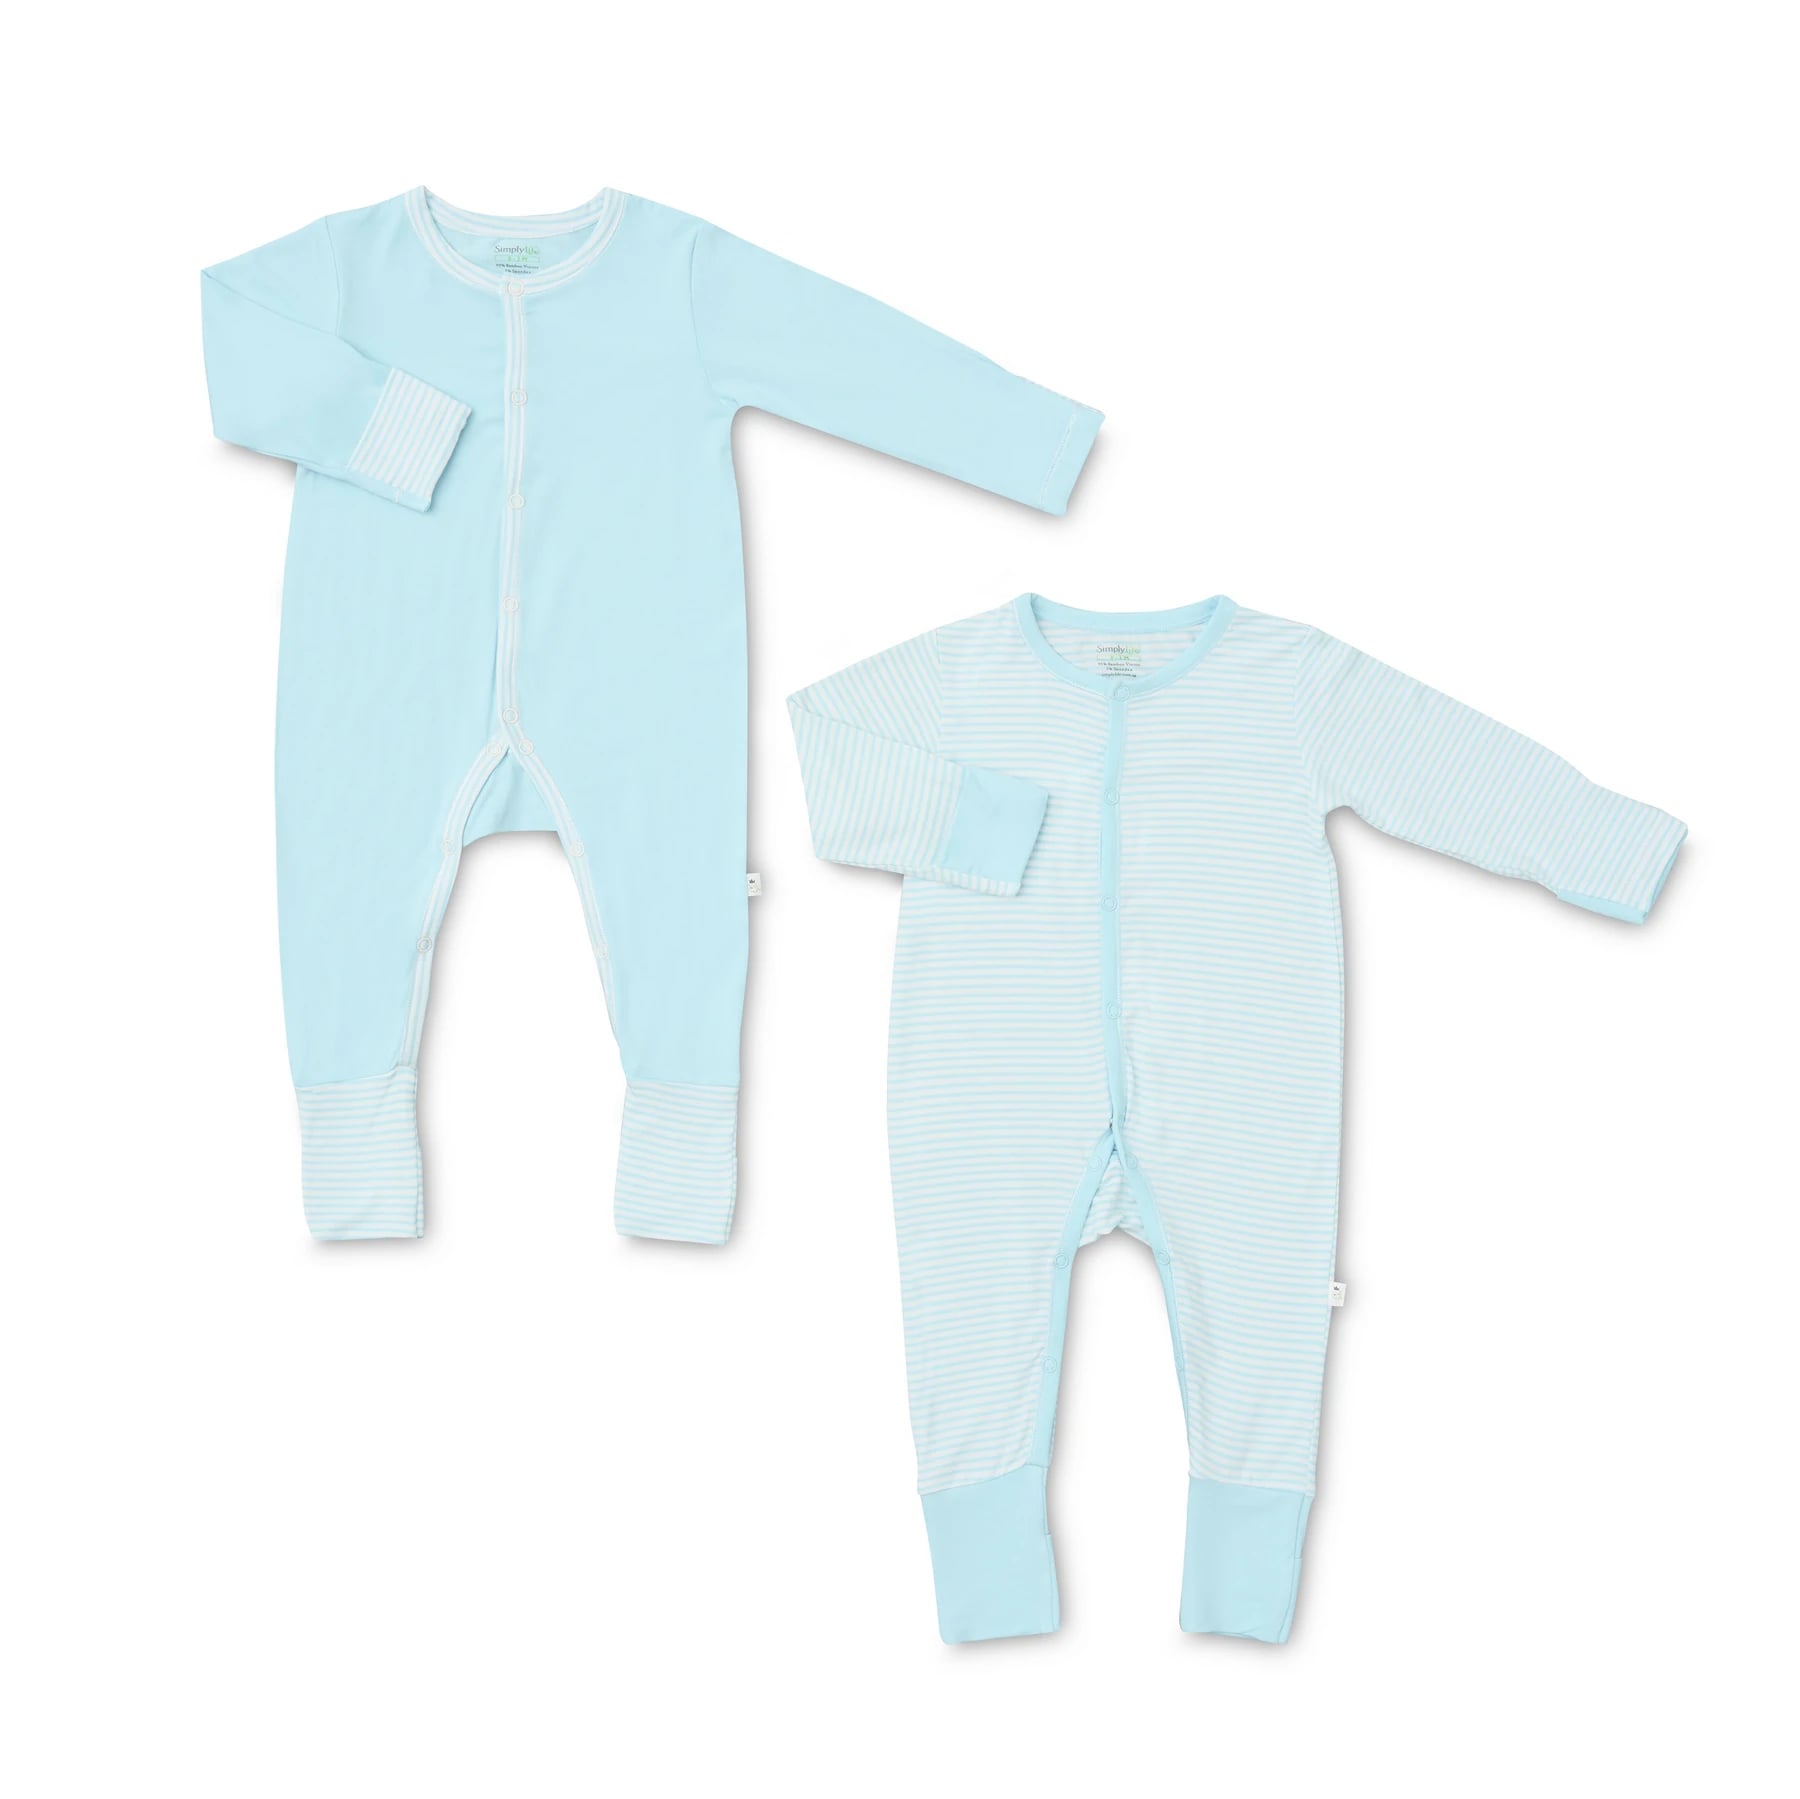 Simply Life Bamboo Sleepsuits L/S front snap button folded mitten & footie 2pcs - Turquoise Stripes & Plain (SLWR-38TSTQ2)